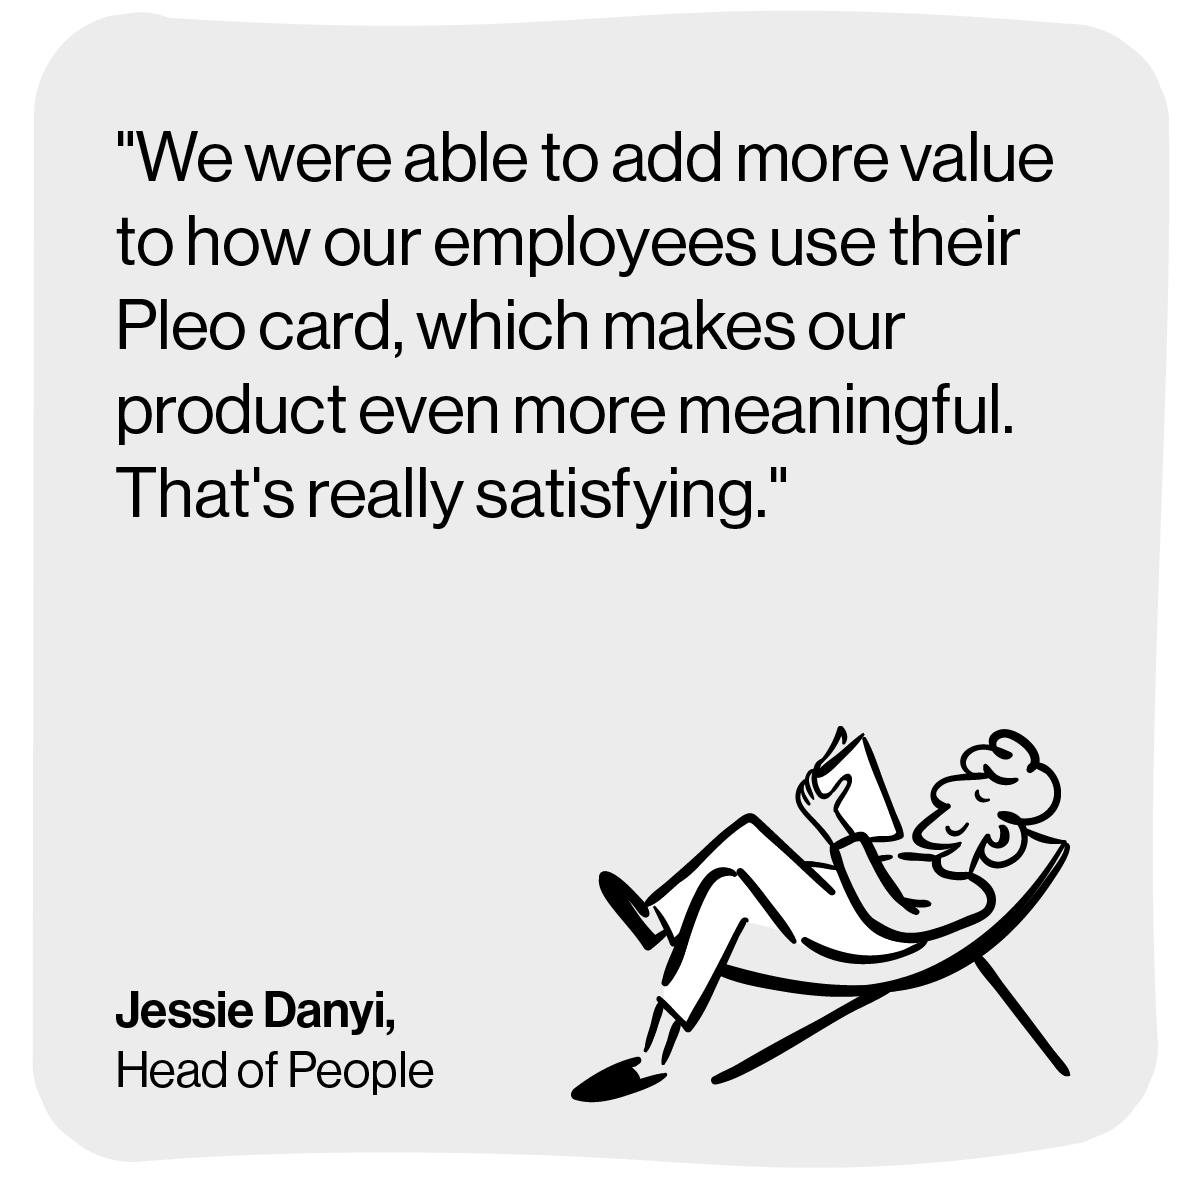 Quote from Jessie : "We were able to add more value to how our employees use their Pleo card, which makes our product even more meaningful. That's really satisfying."